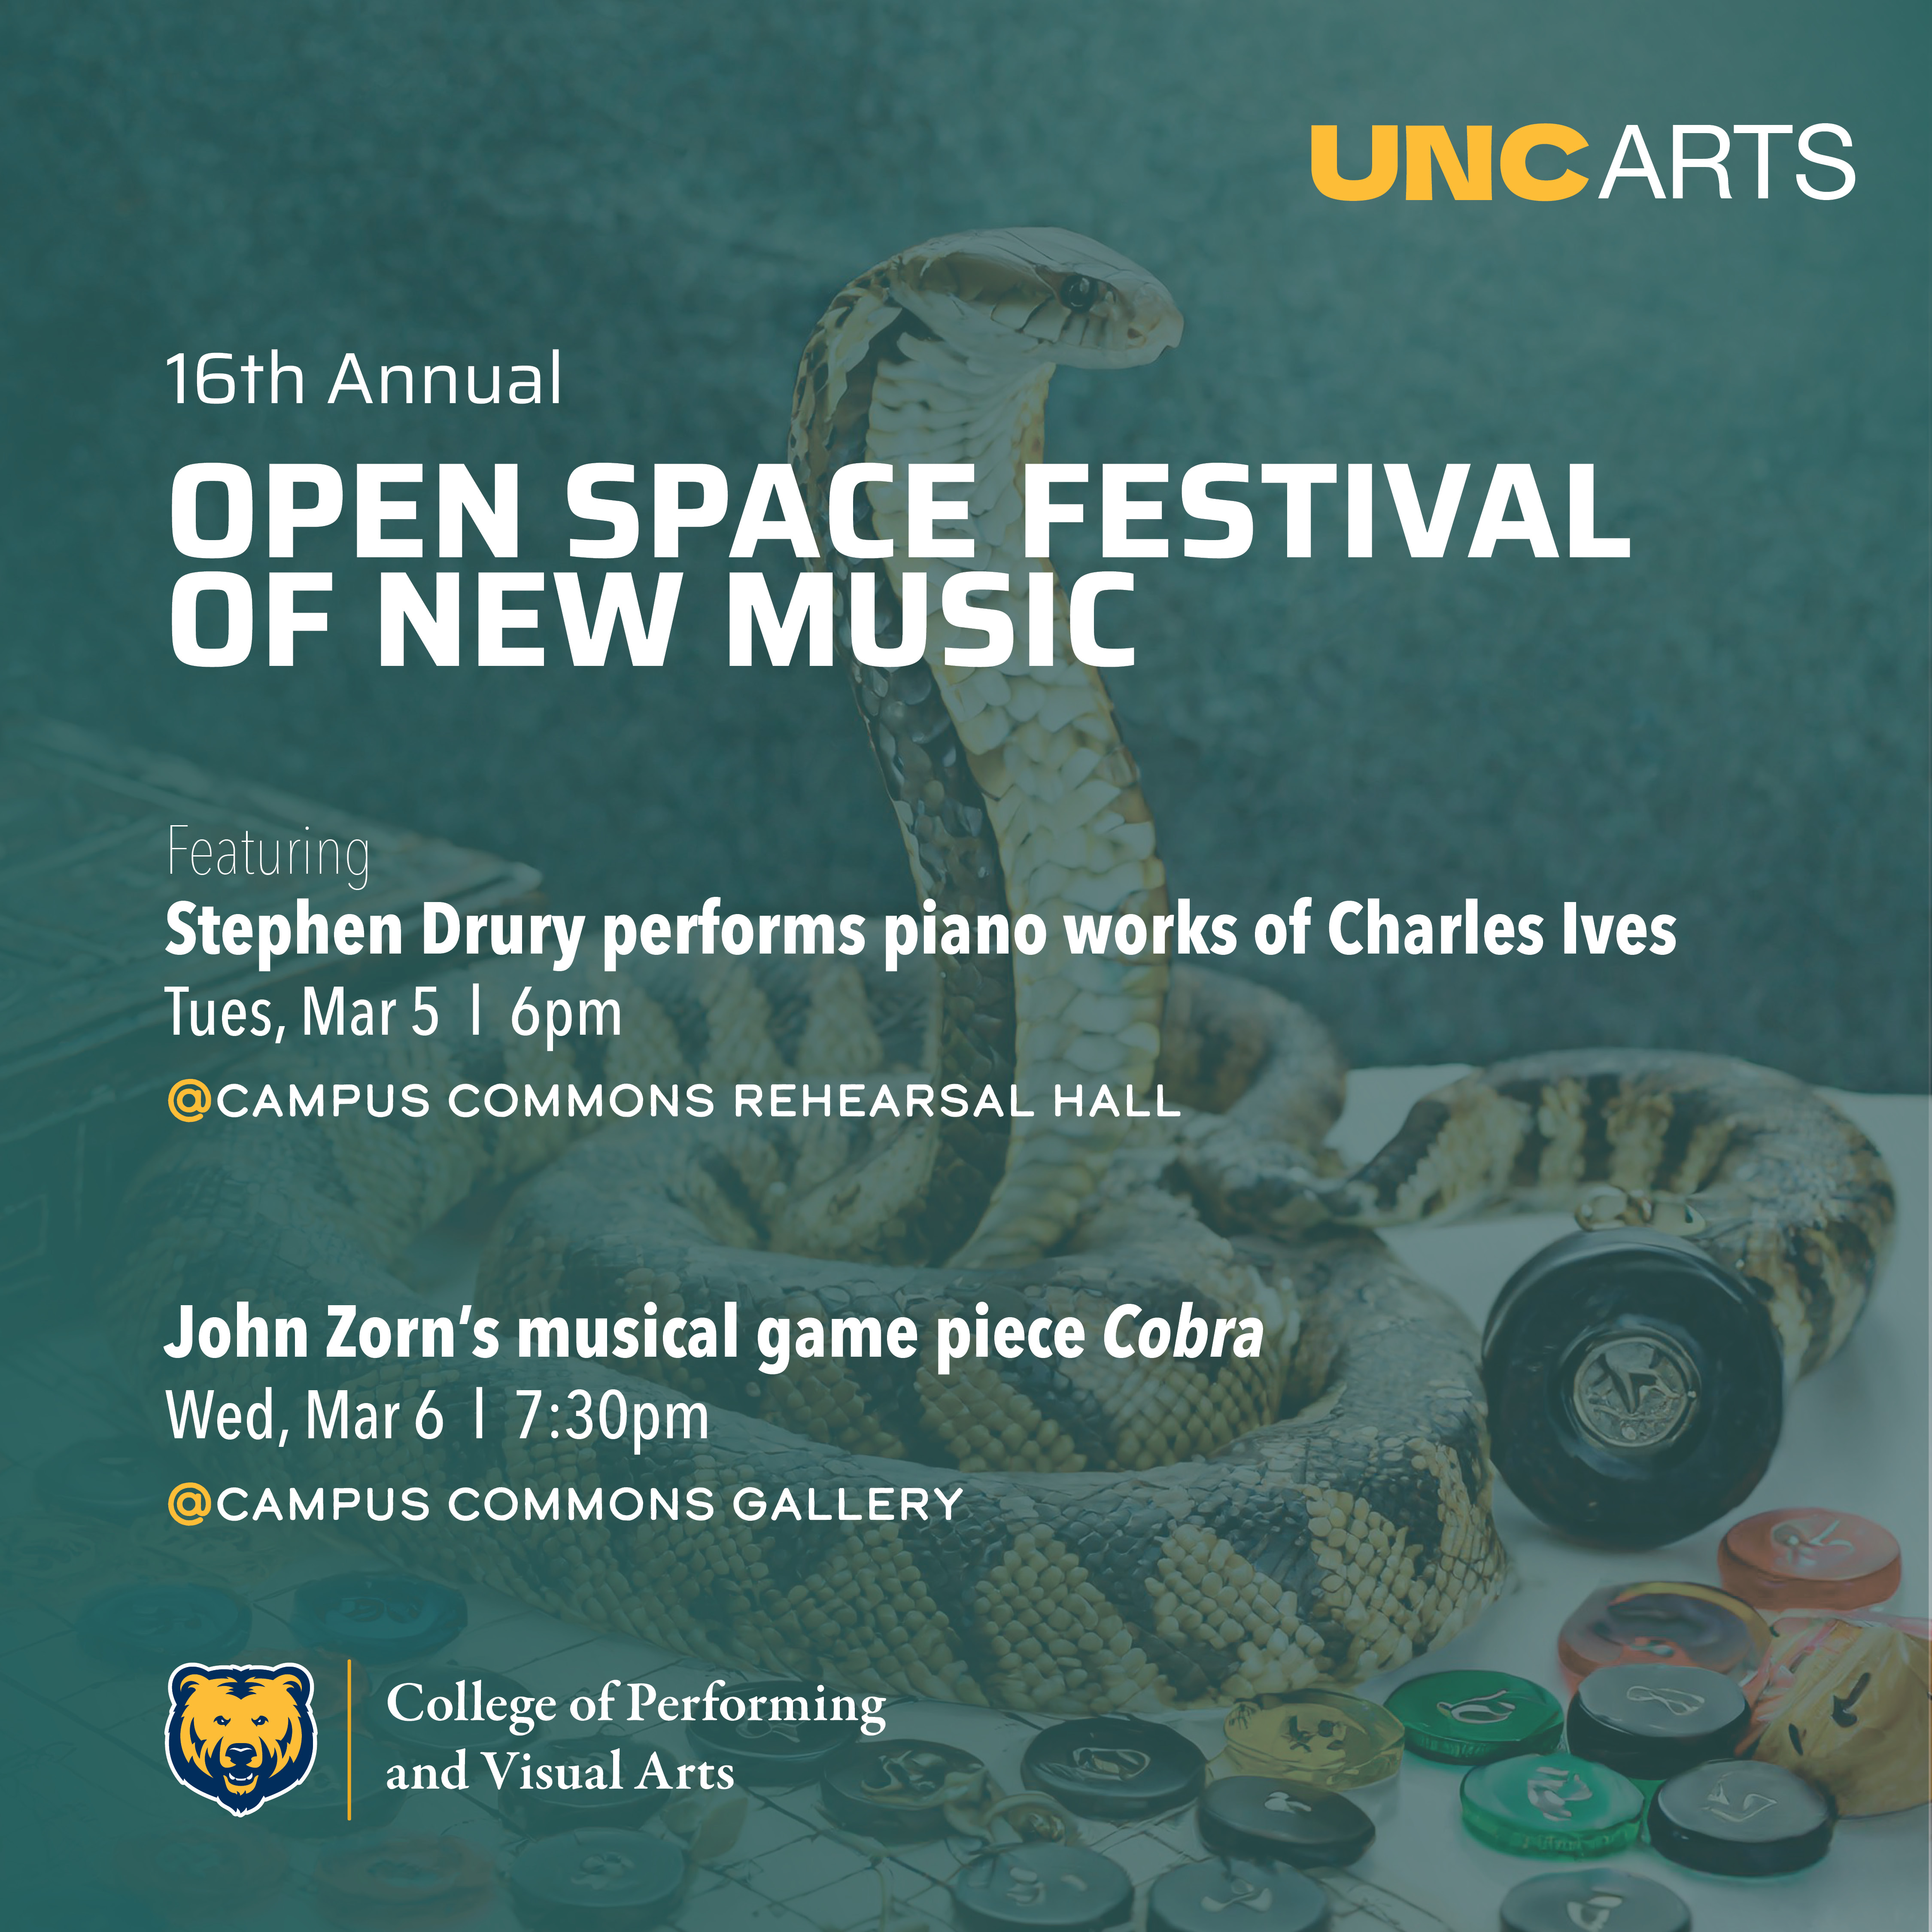 Open Space Festival of New Music